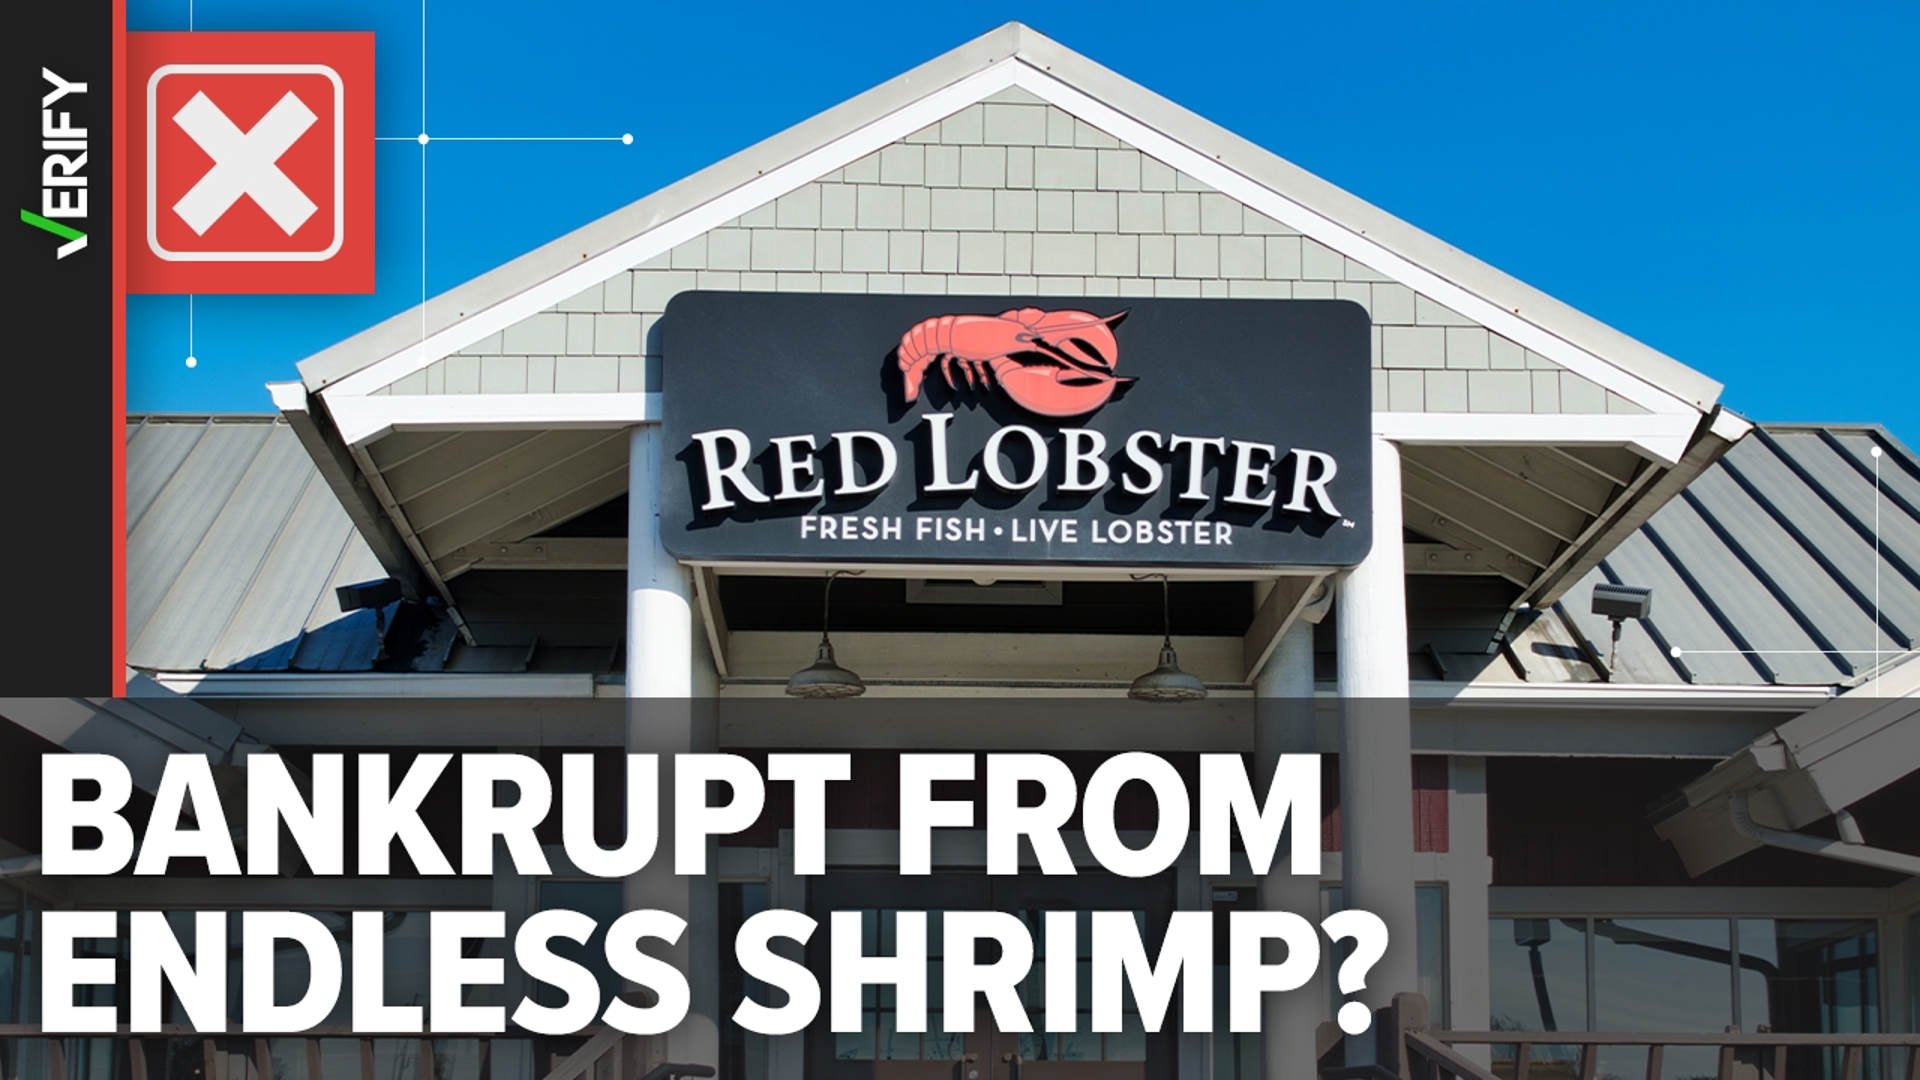 After Red Lobster filed for chapter 11 bankruptcy protection, some said endless shrimp caused it. The deal hurt Red Lobster, but other factors contributed more.